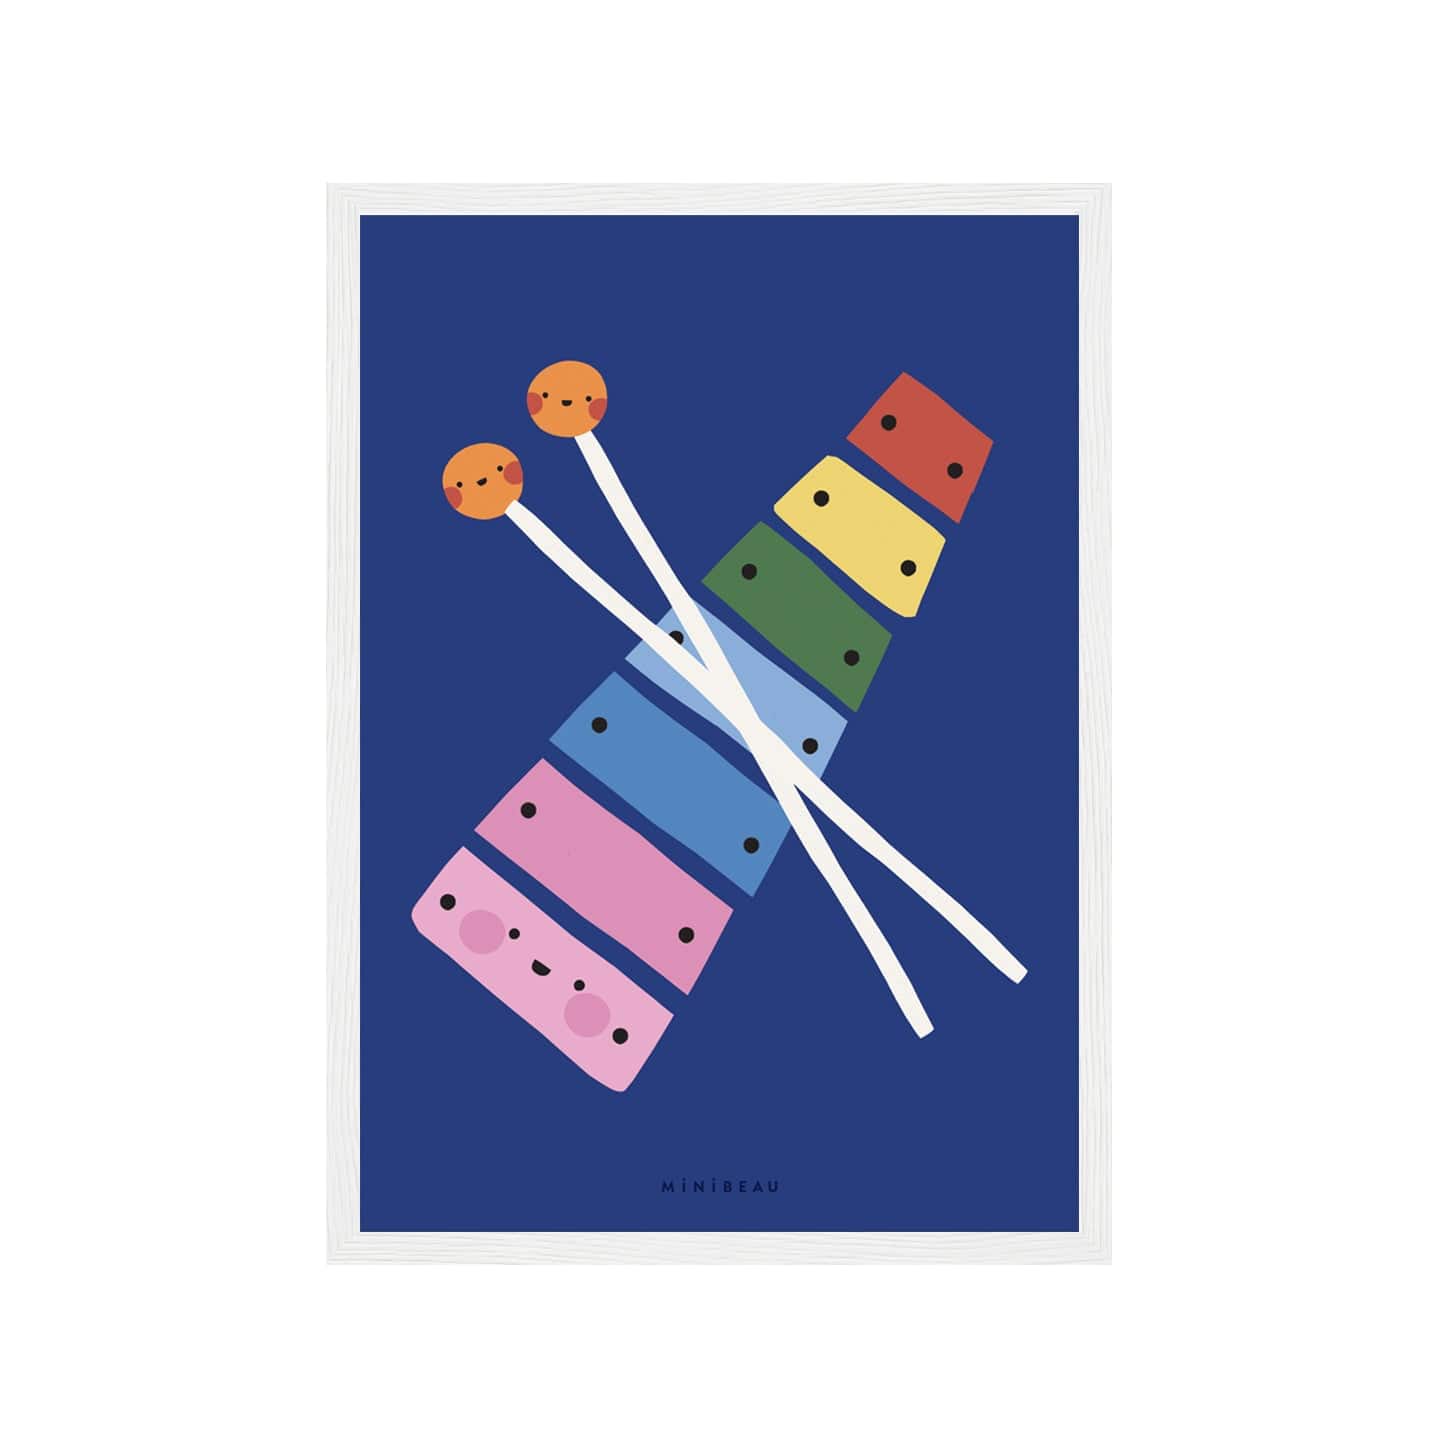 Art print in a white frame. Our Happy Alphabet 'X' Art Print shows a smiling xylophone with bars in rainbow colours, crossed by smiling beaters, creating an X shape on a dark blue background.